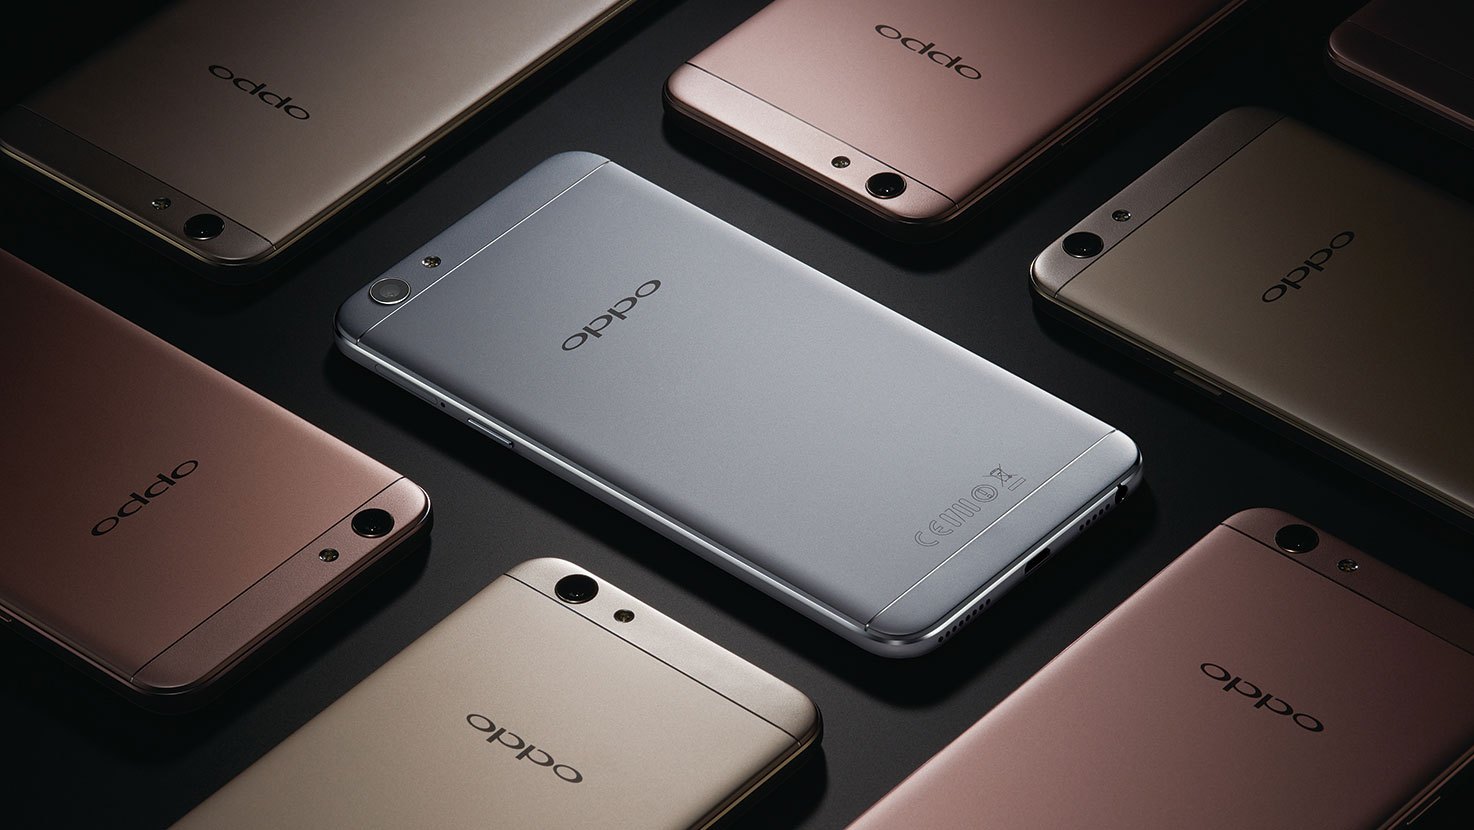 OPPO, Find X, Chinese smartphone maker, Chinese company, Mobile phones, Smartphones, Paris, Gadget news, Technology news